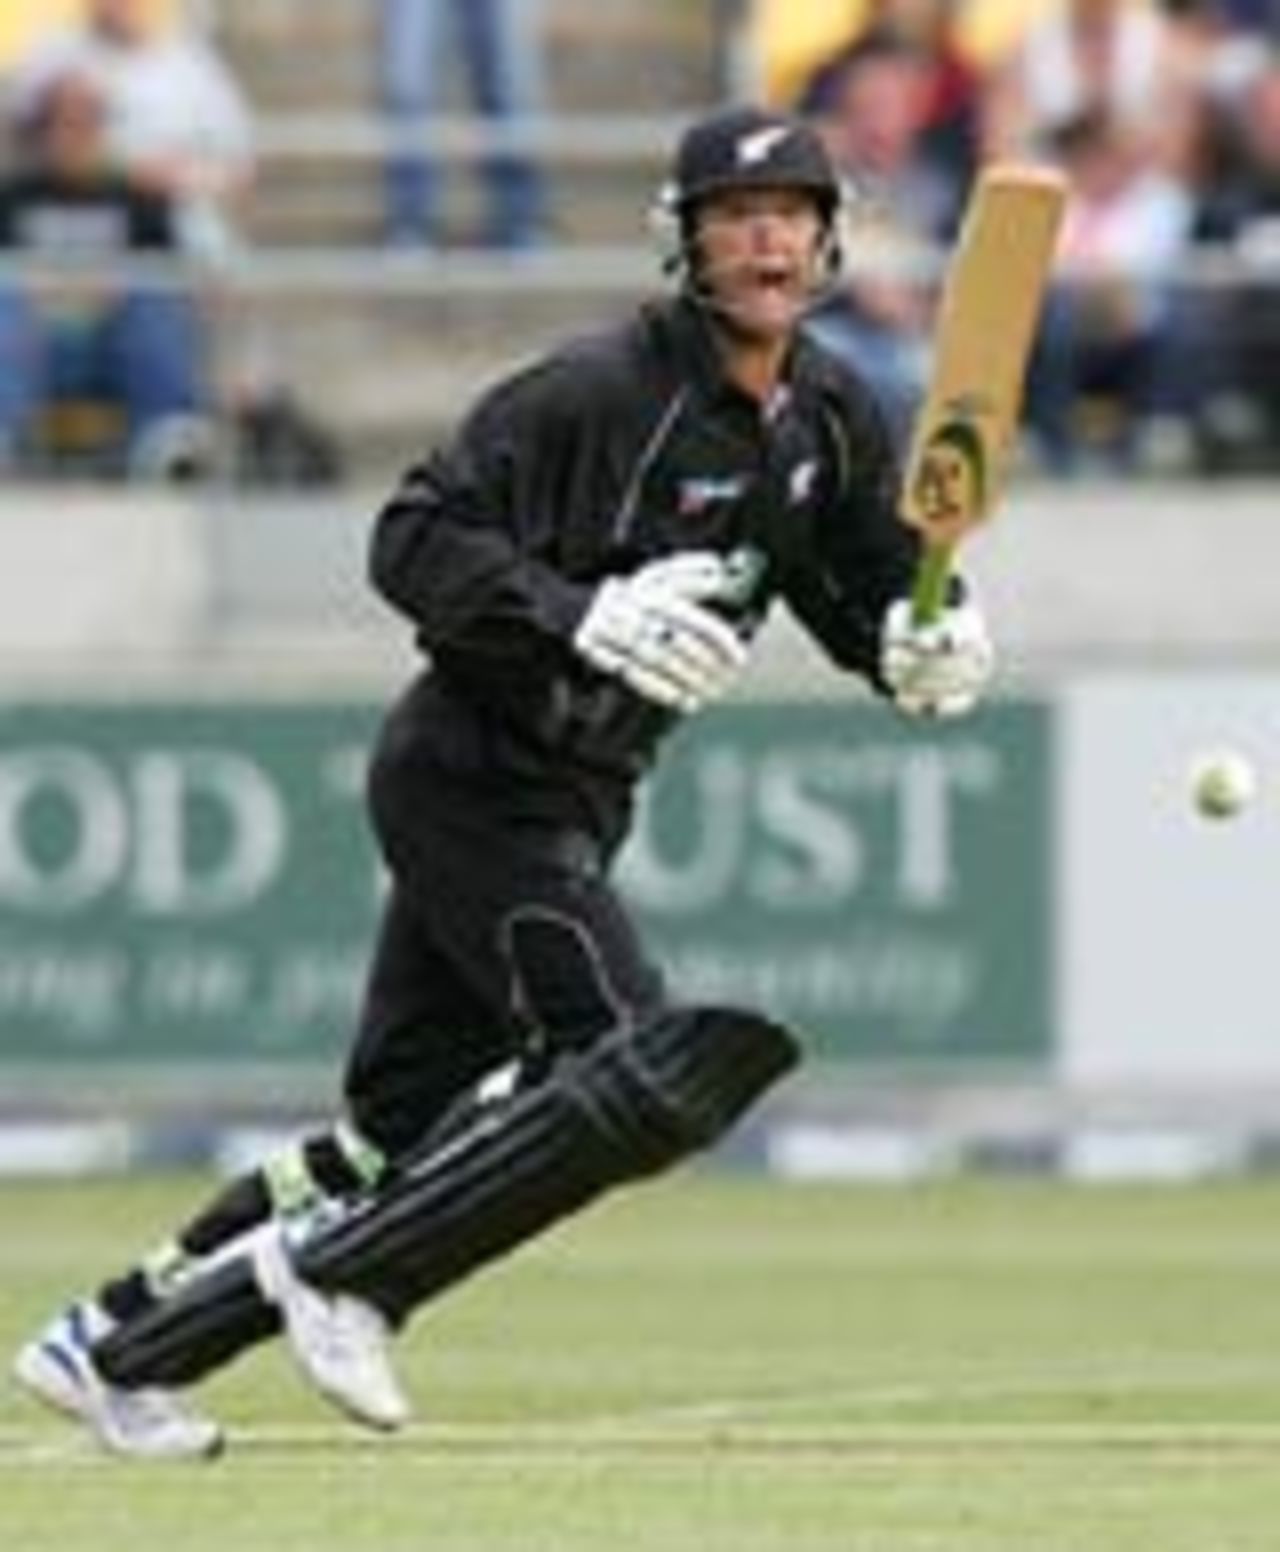 Nathan Astle on his way to 109, New Zealand v FICA World XI, 2nd match, Wellington, January 24, 2005